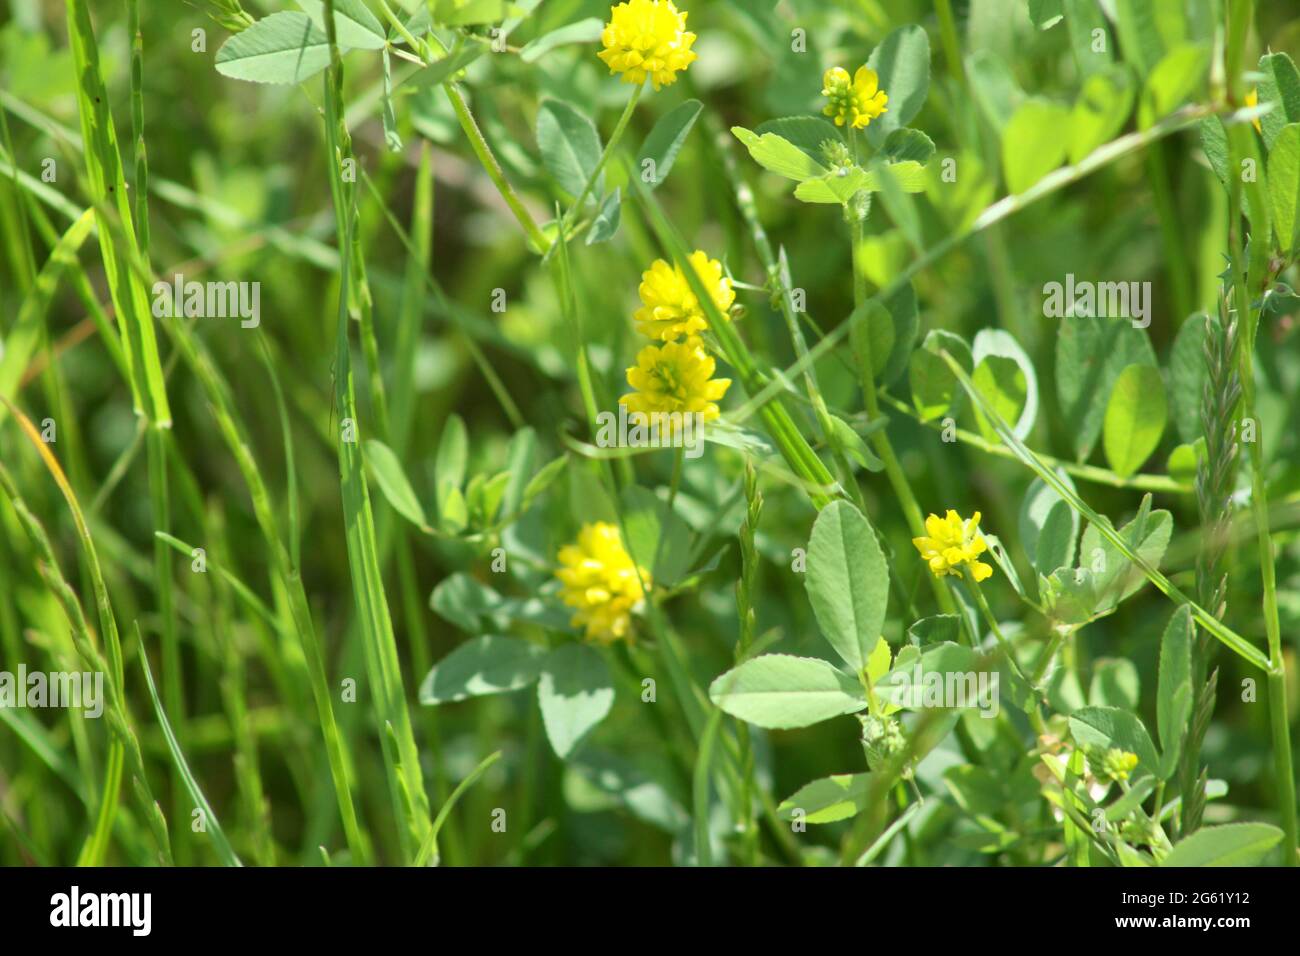 Hop trefoil in bloom close-up view selective focus Stock Photo